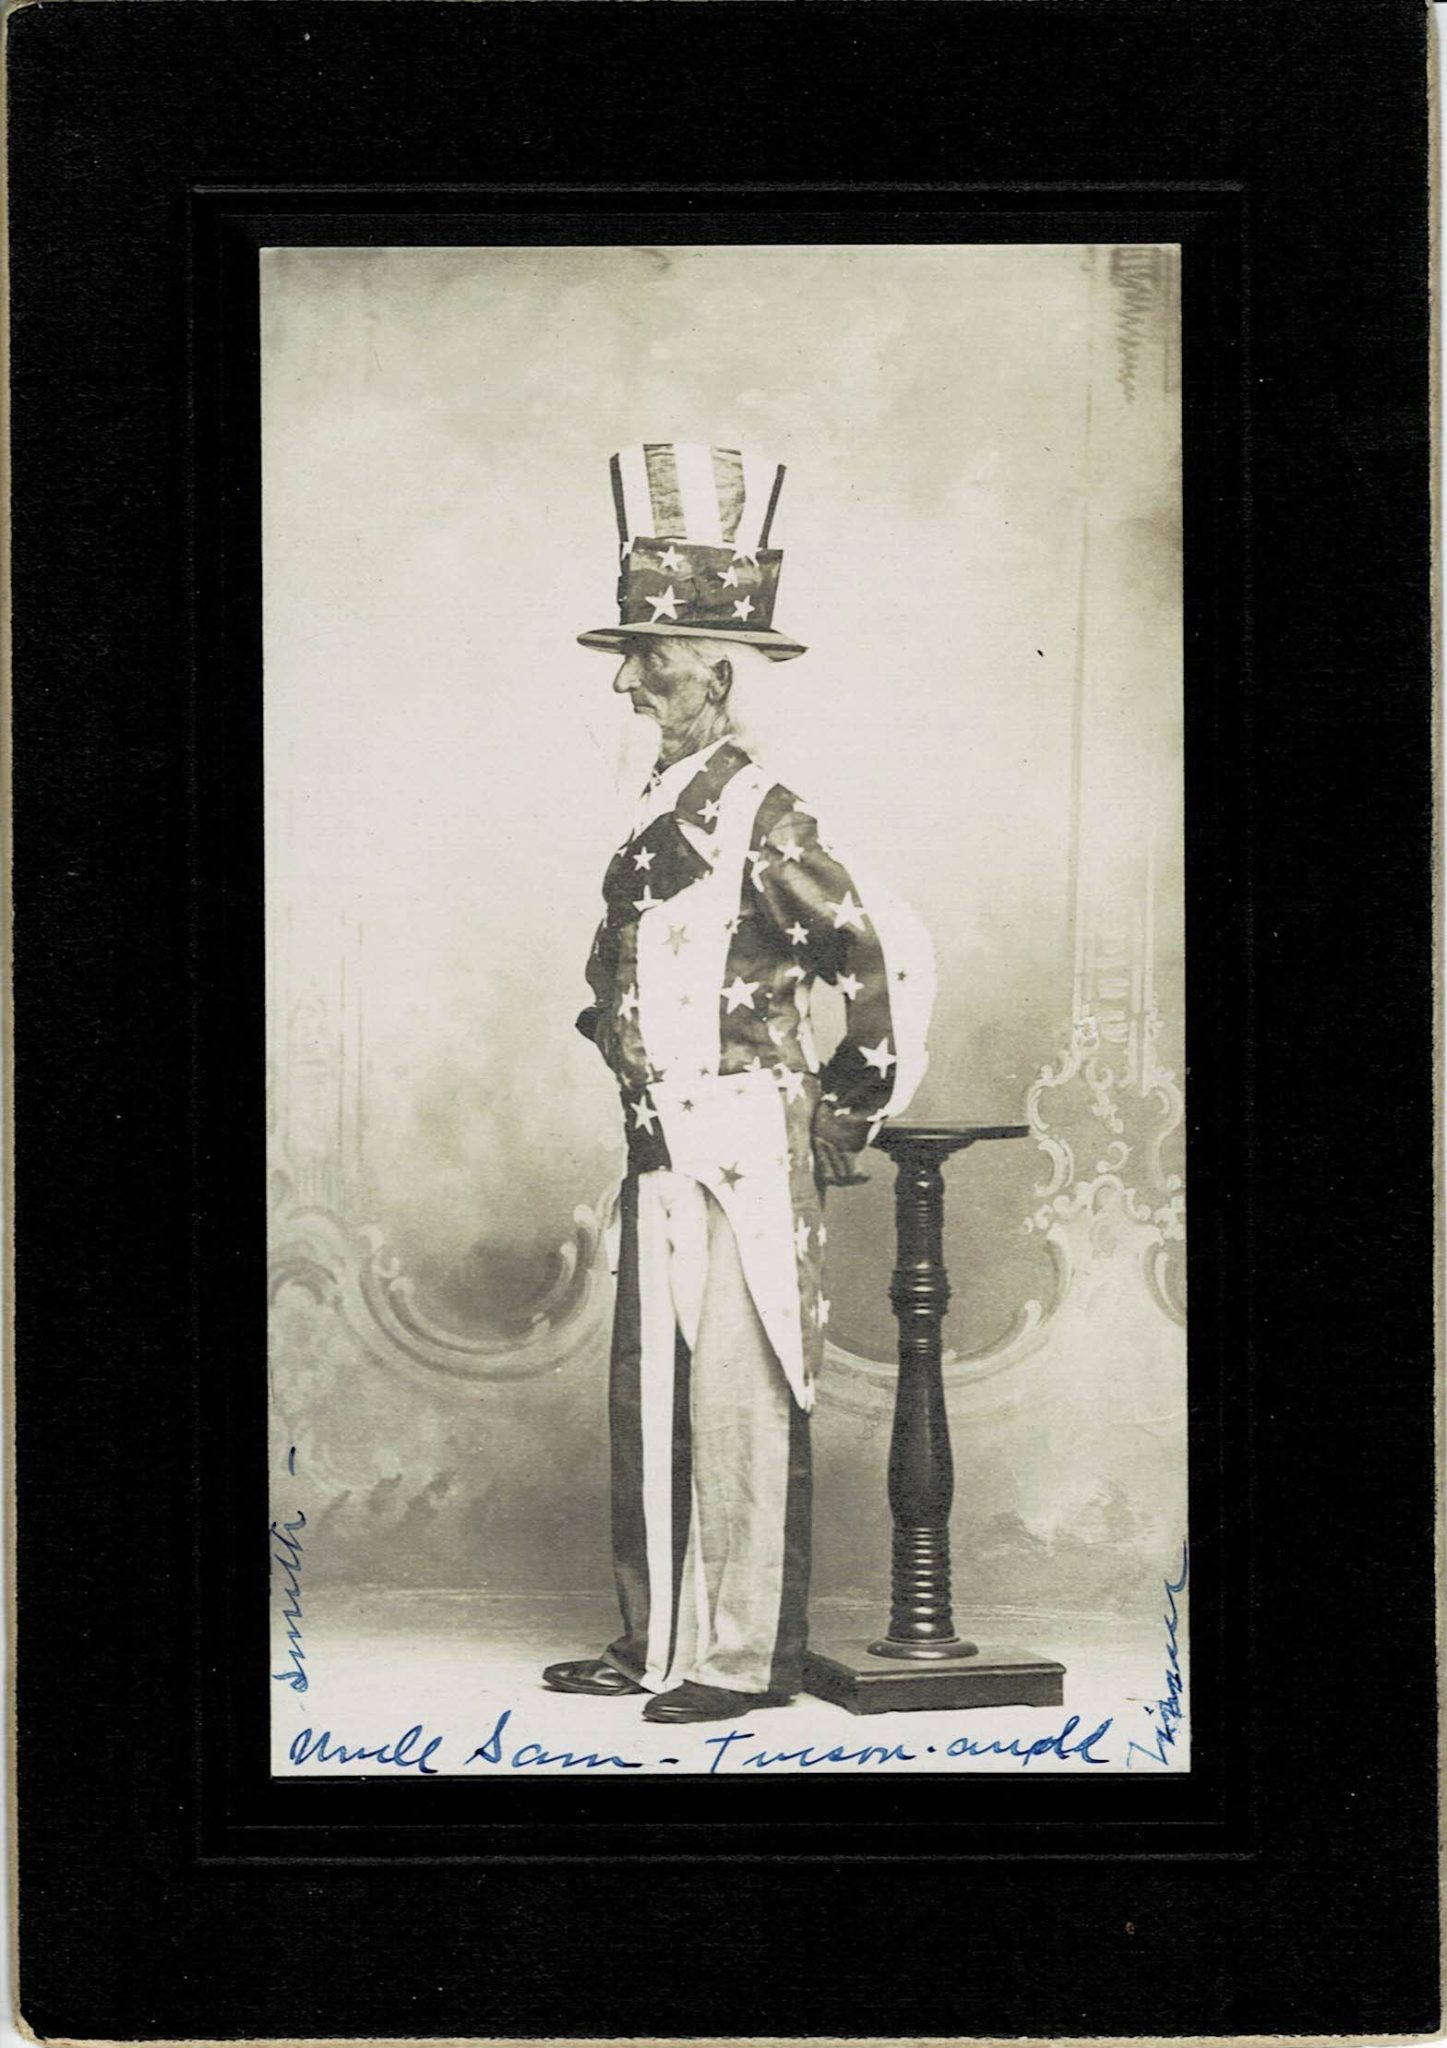 William Smith dressed as Uncle Sam with hand written notations